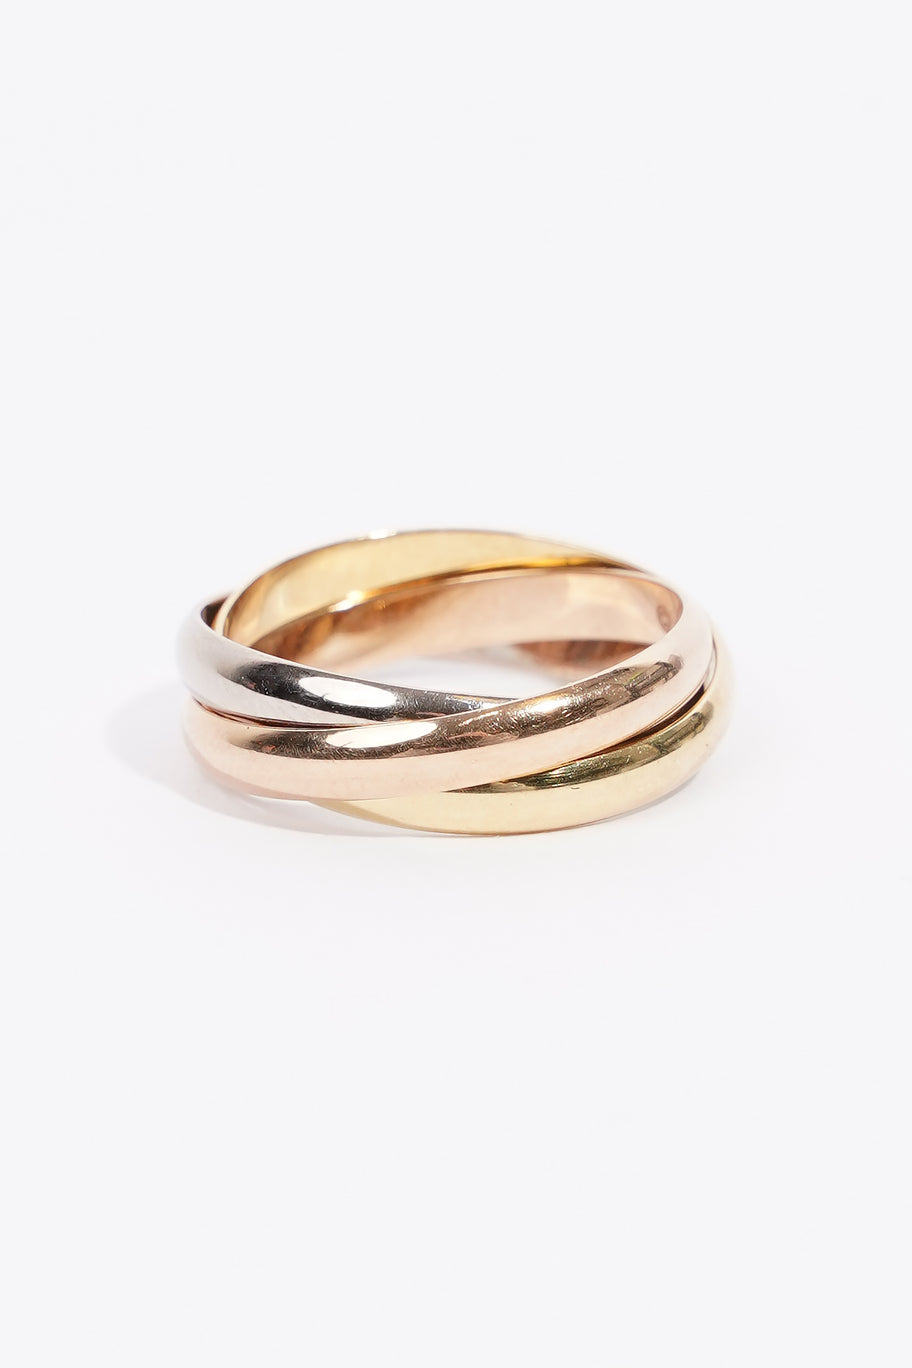 Trinity Ring, Small Model Rose Gold / White Gold Yellow Gold 54mm Image 5